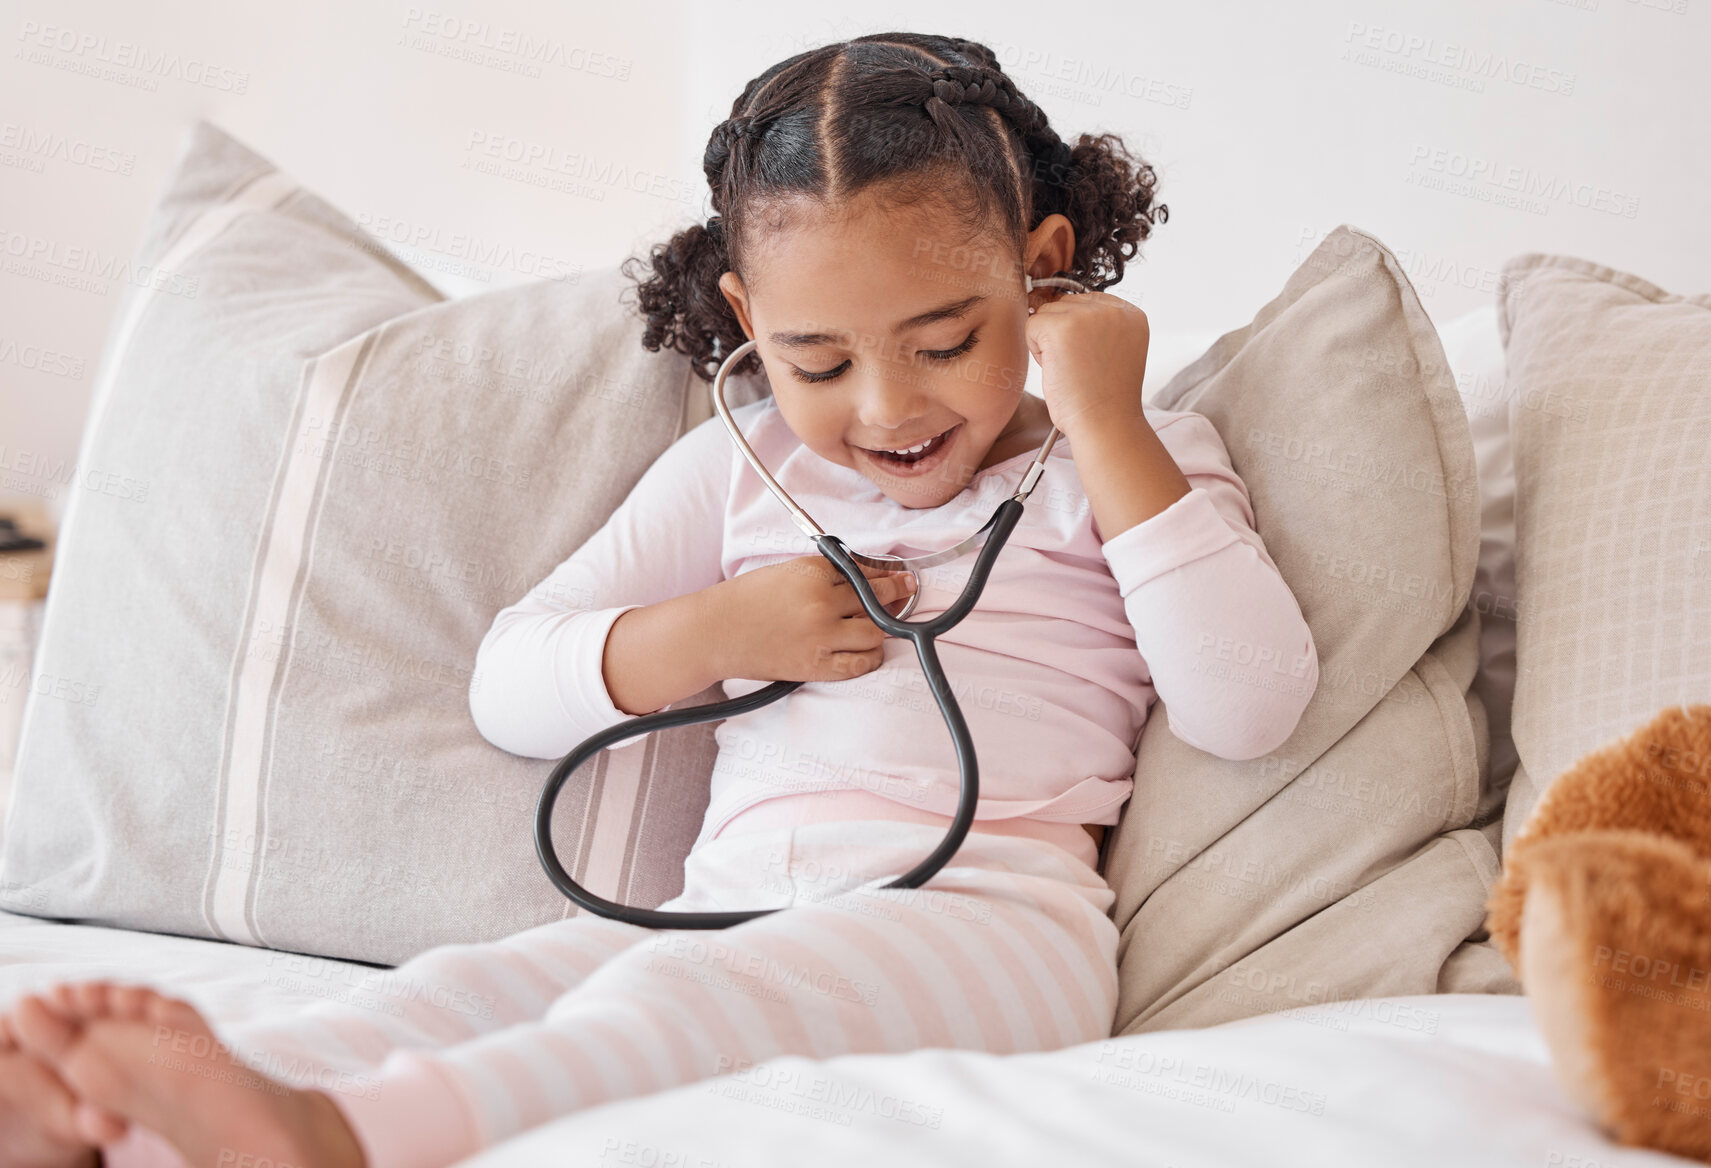 Buy stock photo Happy girl, doctor stethoscope and listening to heartbeat sound with excited smile at play learning. Young and curious child with healthcare exam equipment smiling with joy in home bedroom. 